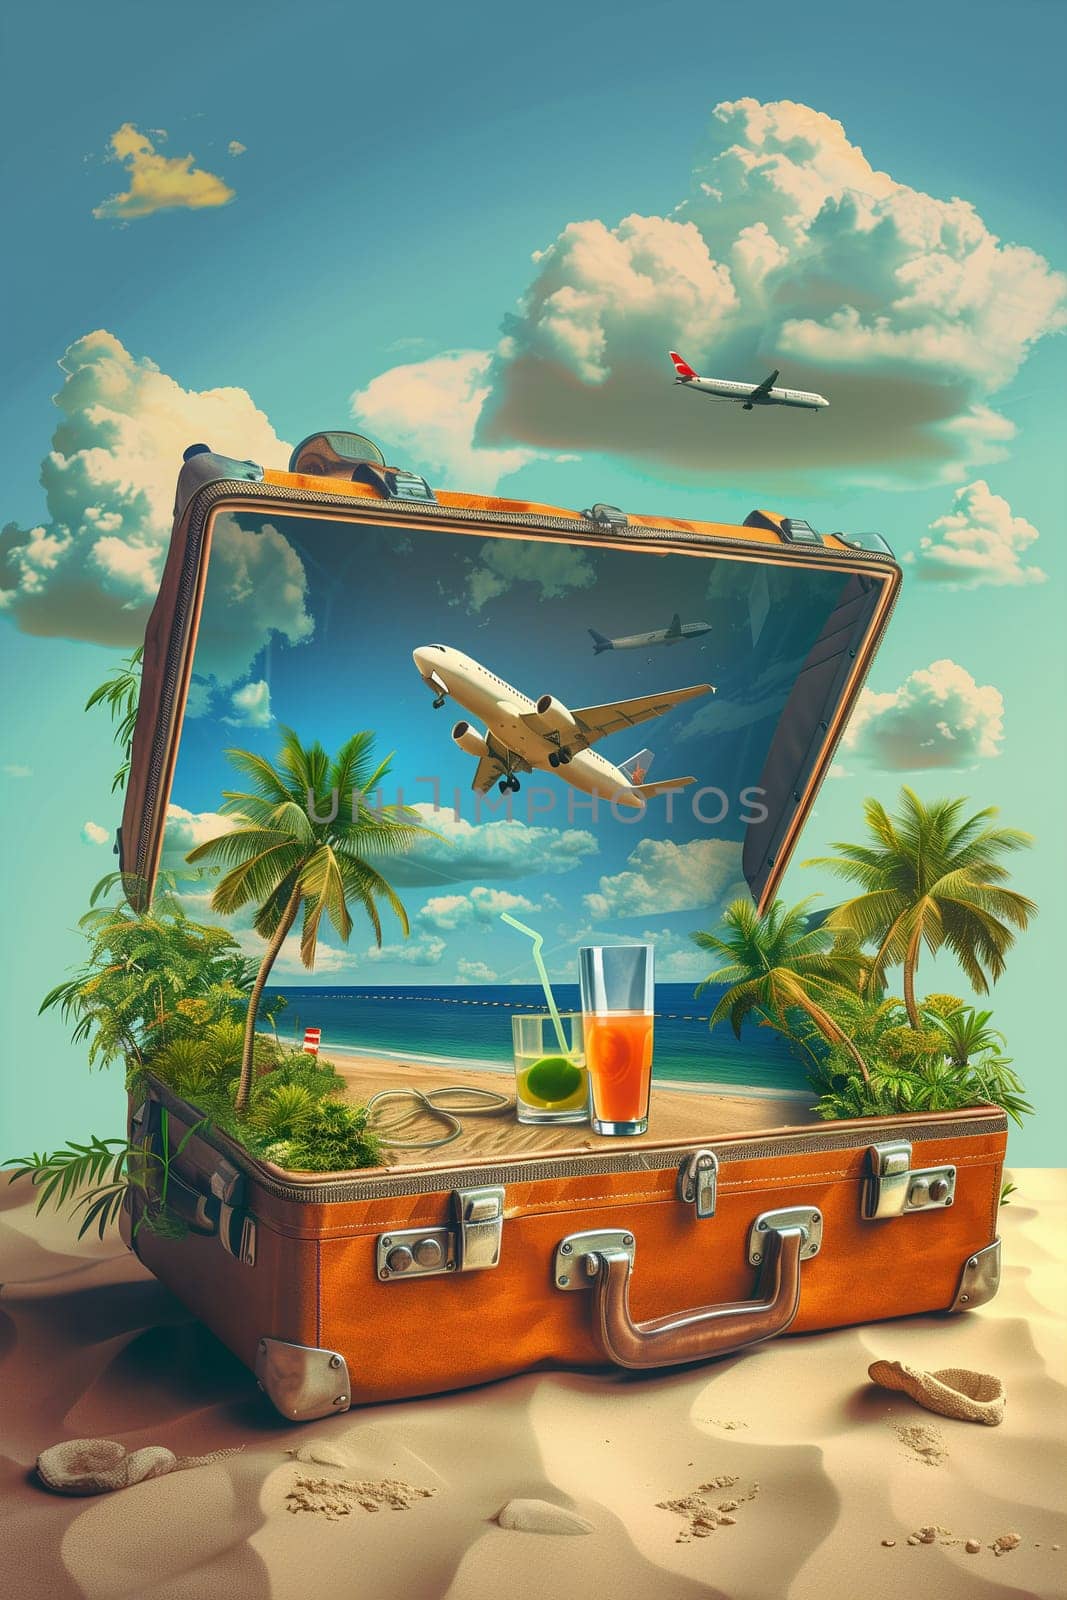 Suitcase, Drink, Palm Trees on Beach by Sd28DimoN_1976